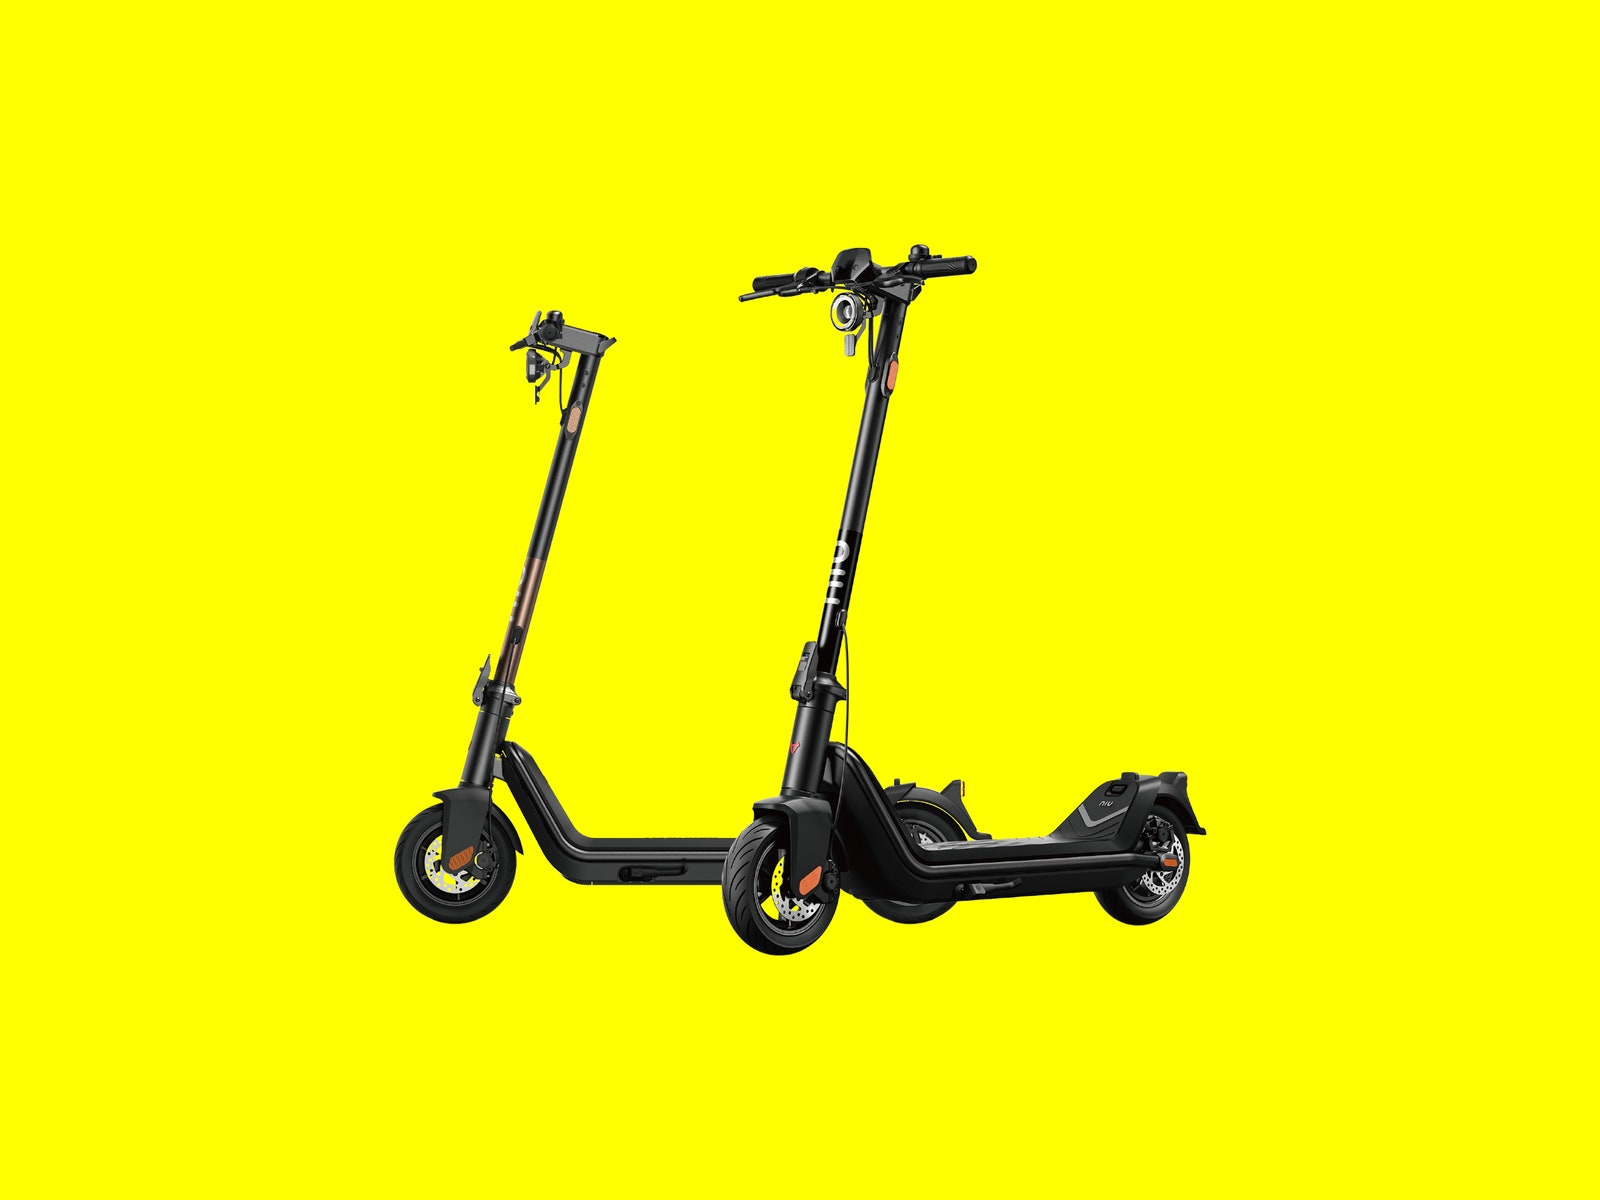 Niu KQi3 Pro electric scooters on a yellow background